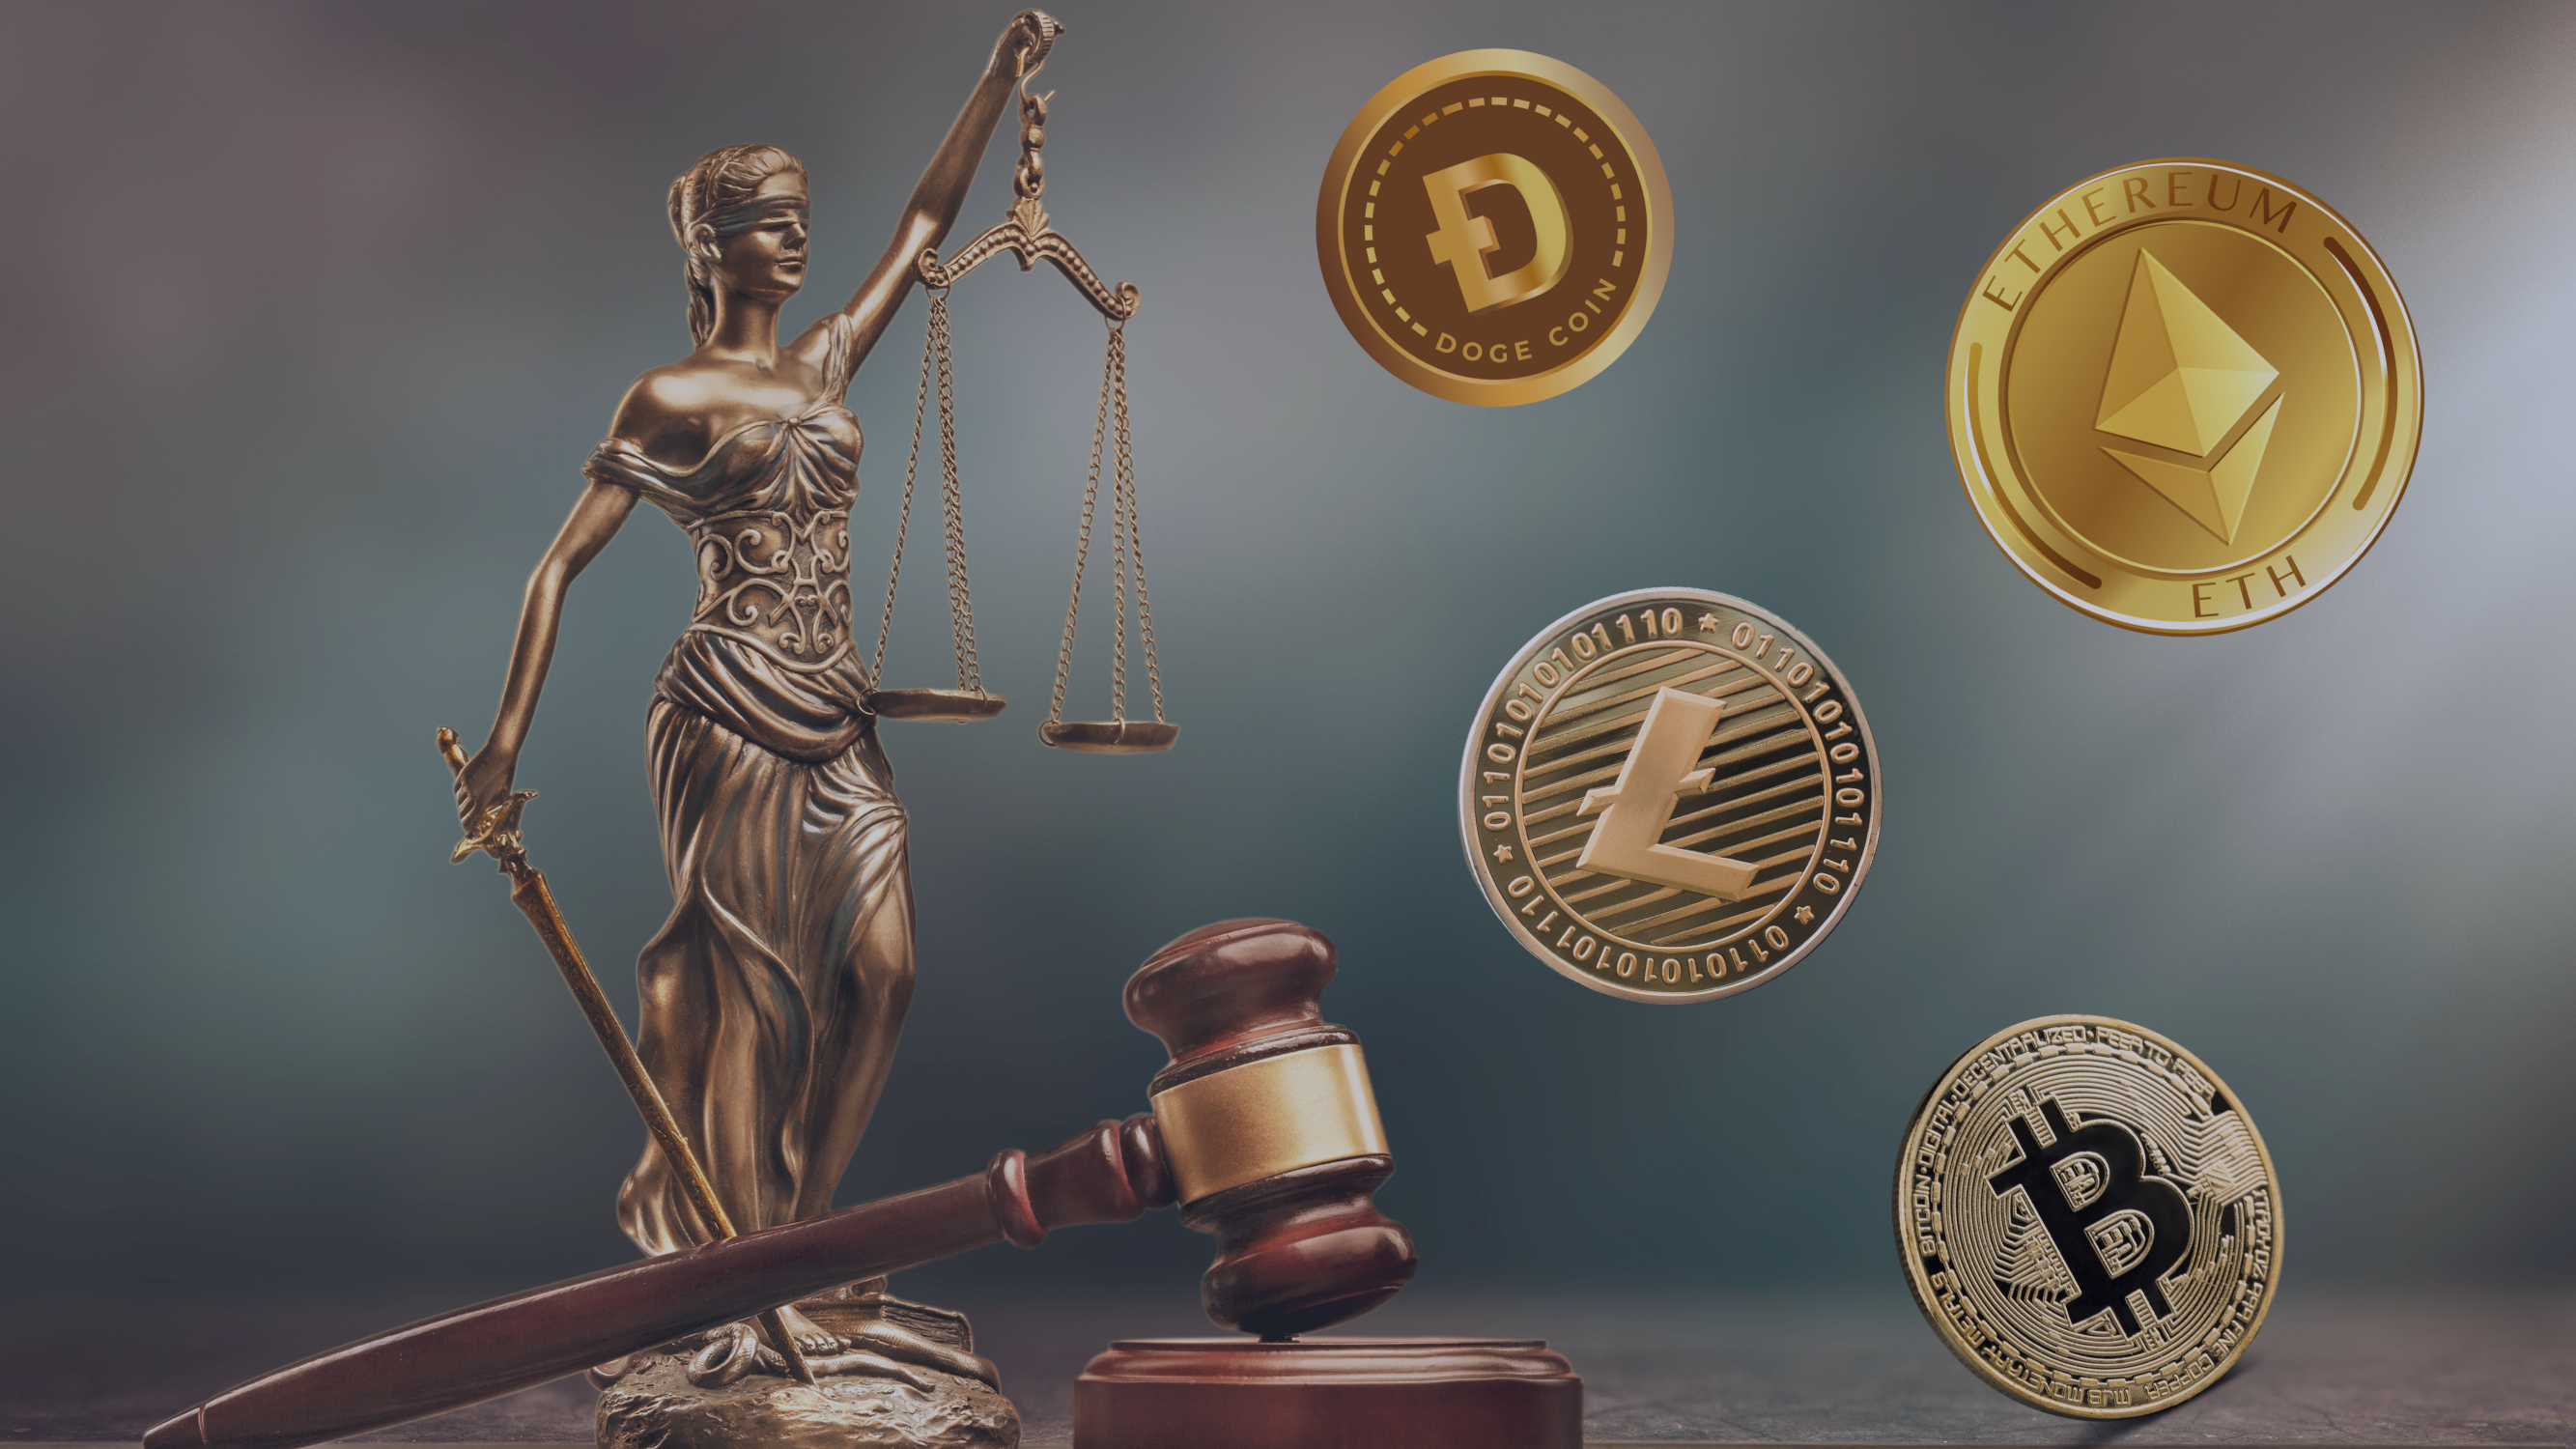 The scales of justice, surrounded by a gavel and coin logos representing cryptocurrency